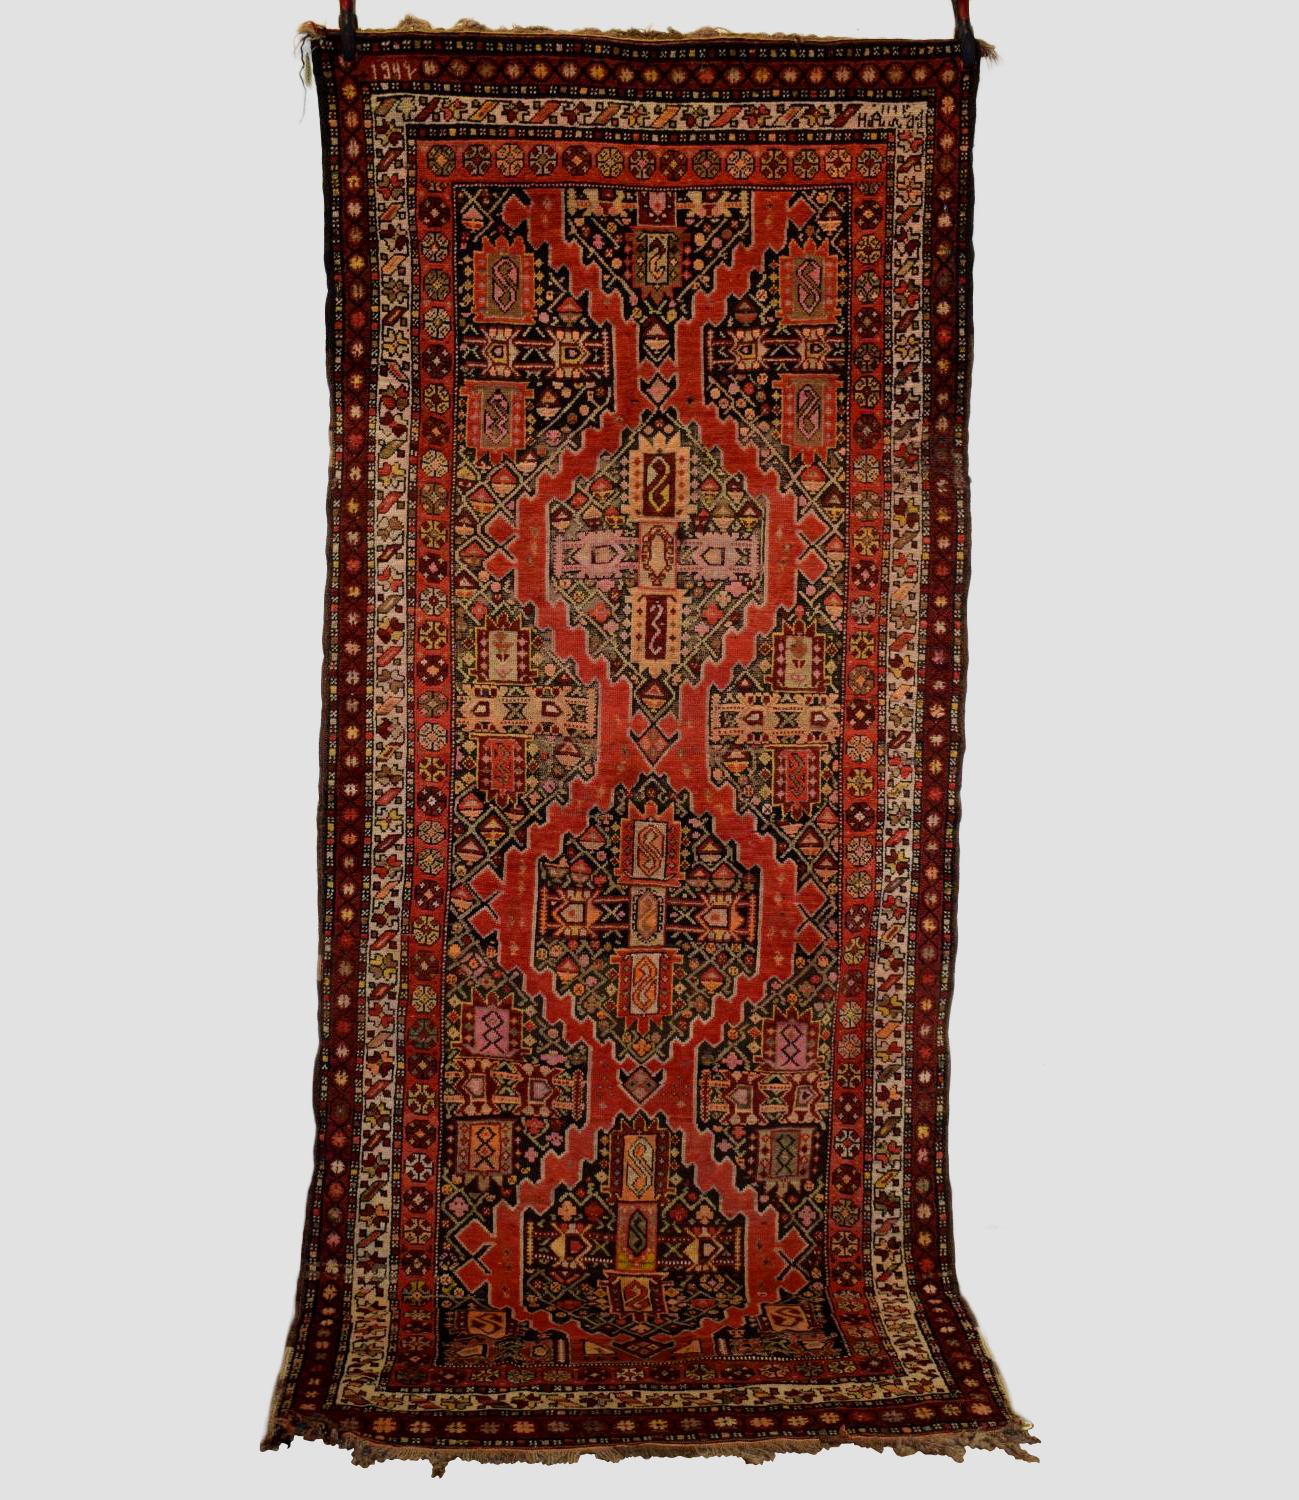 Karabakh rug, south west Caucasus, circa 1930s-40s, 10ft. 6in. X 4ft. 4in. 3.20m. X 1.32m. Date 1949